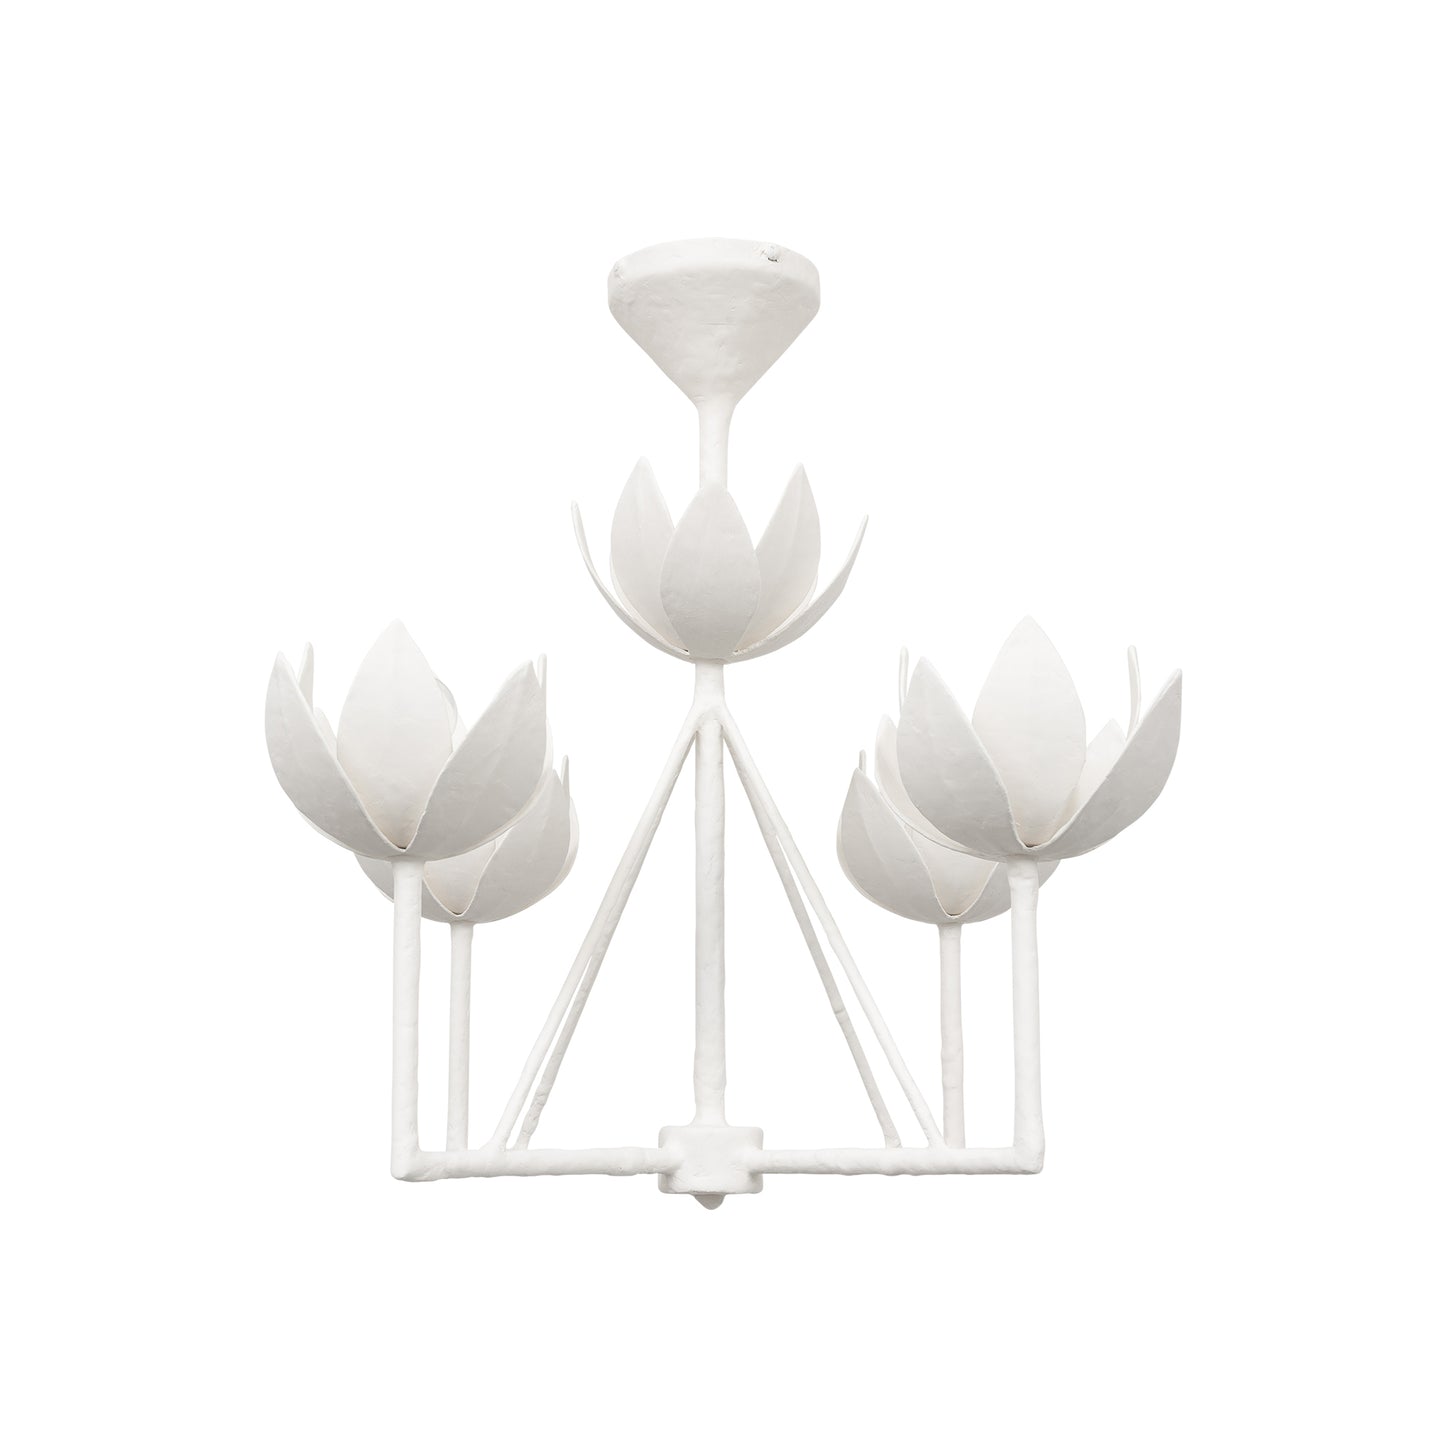 Diego 1-Tier Petite with Flower Detail